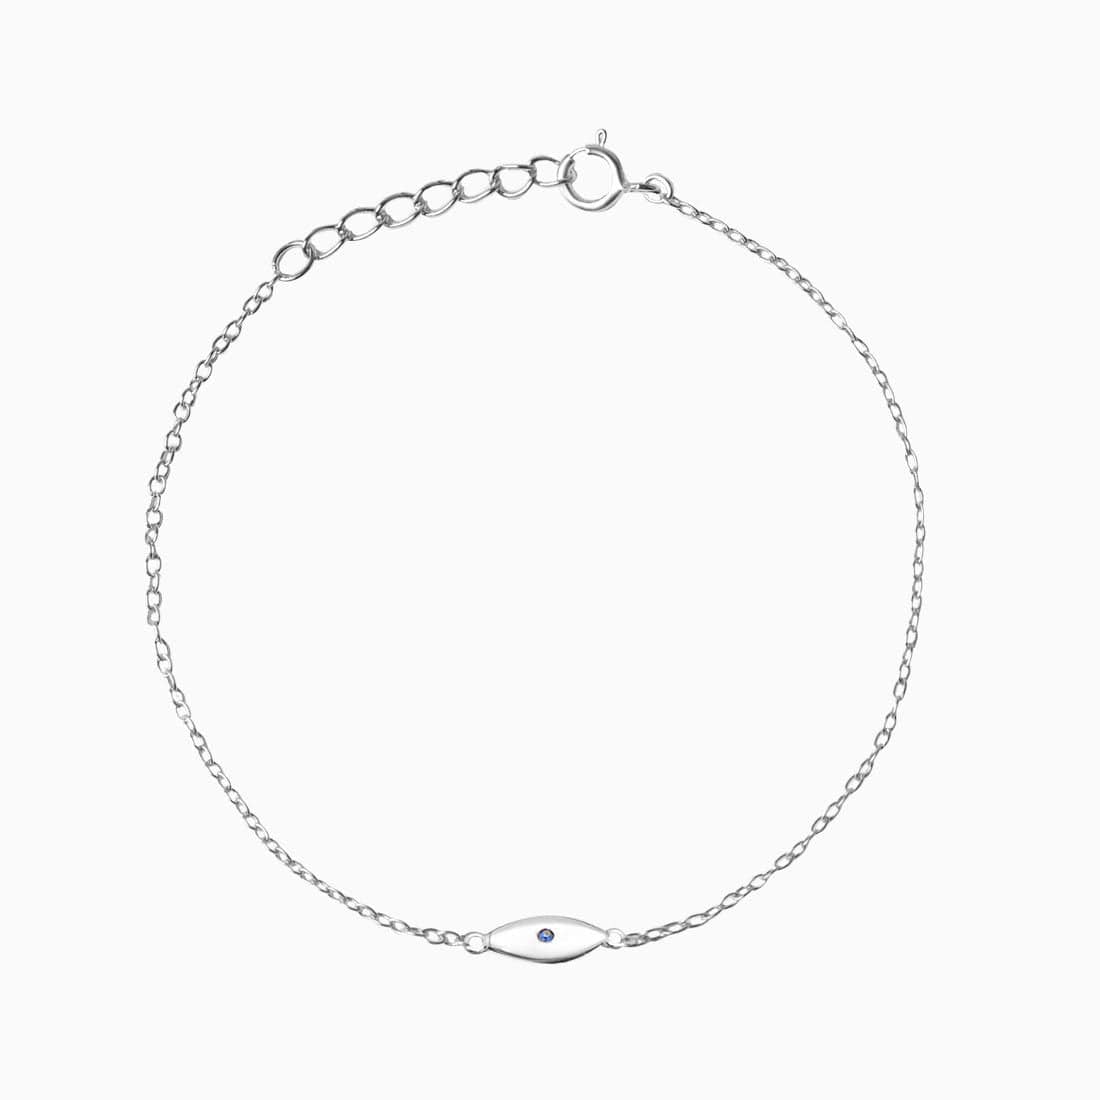 Horus Silver Anklet